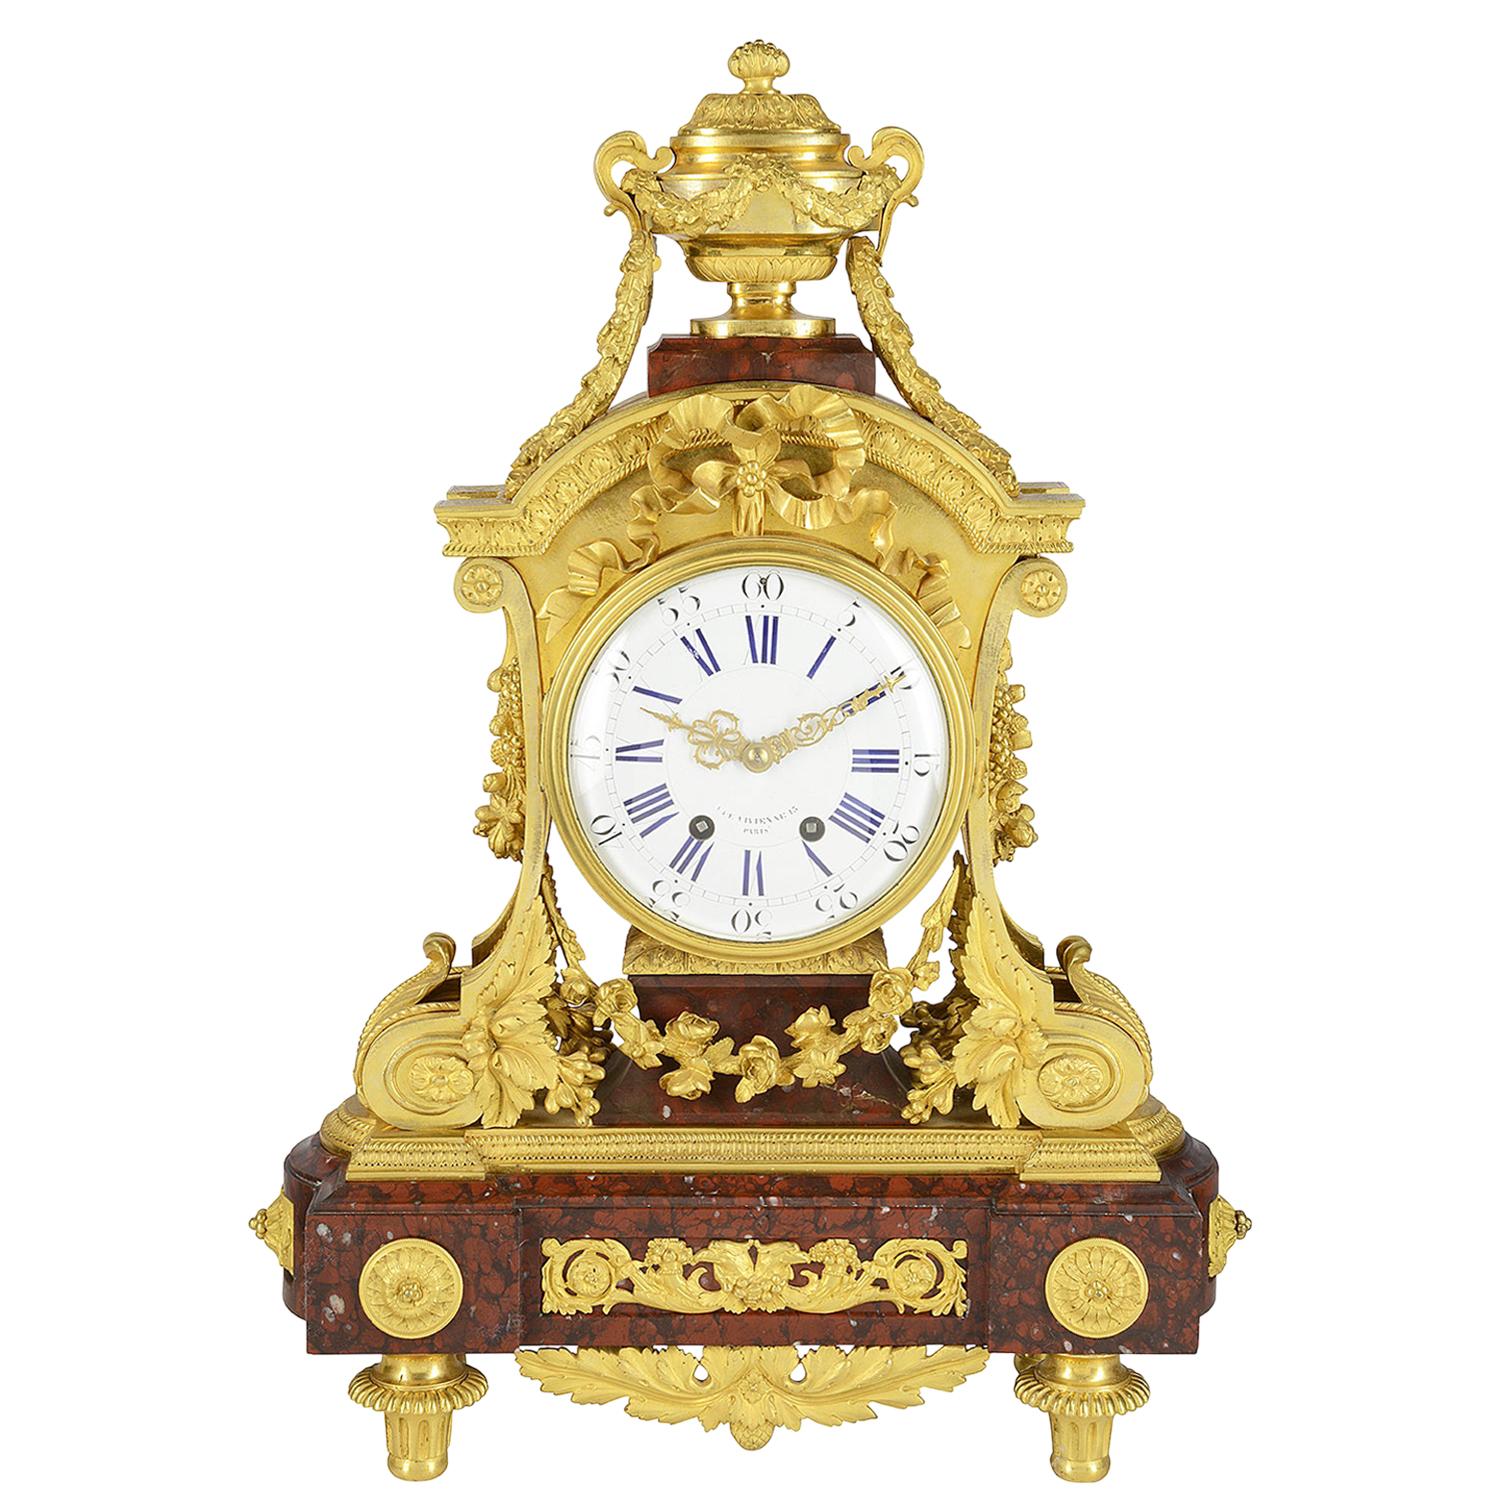 Fine Quality 19th Century French Gilded Mantel Clock For Sale